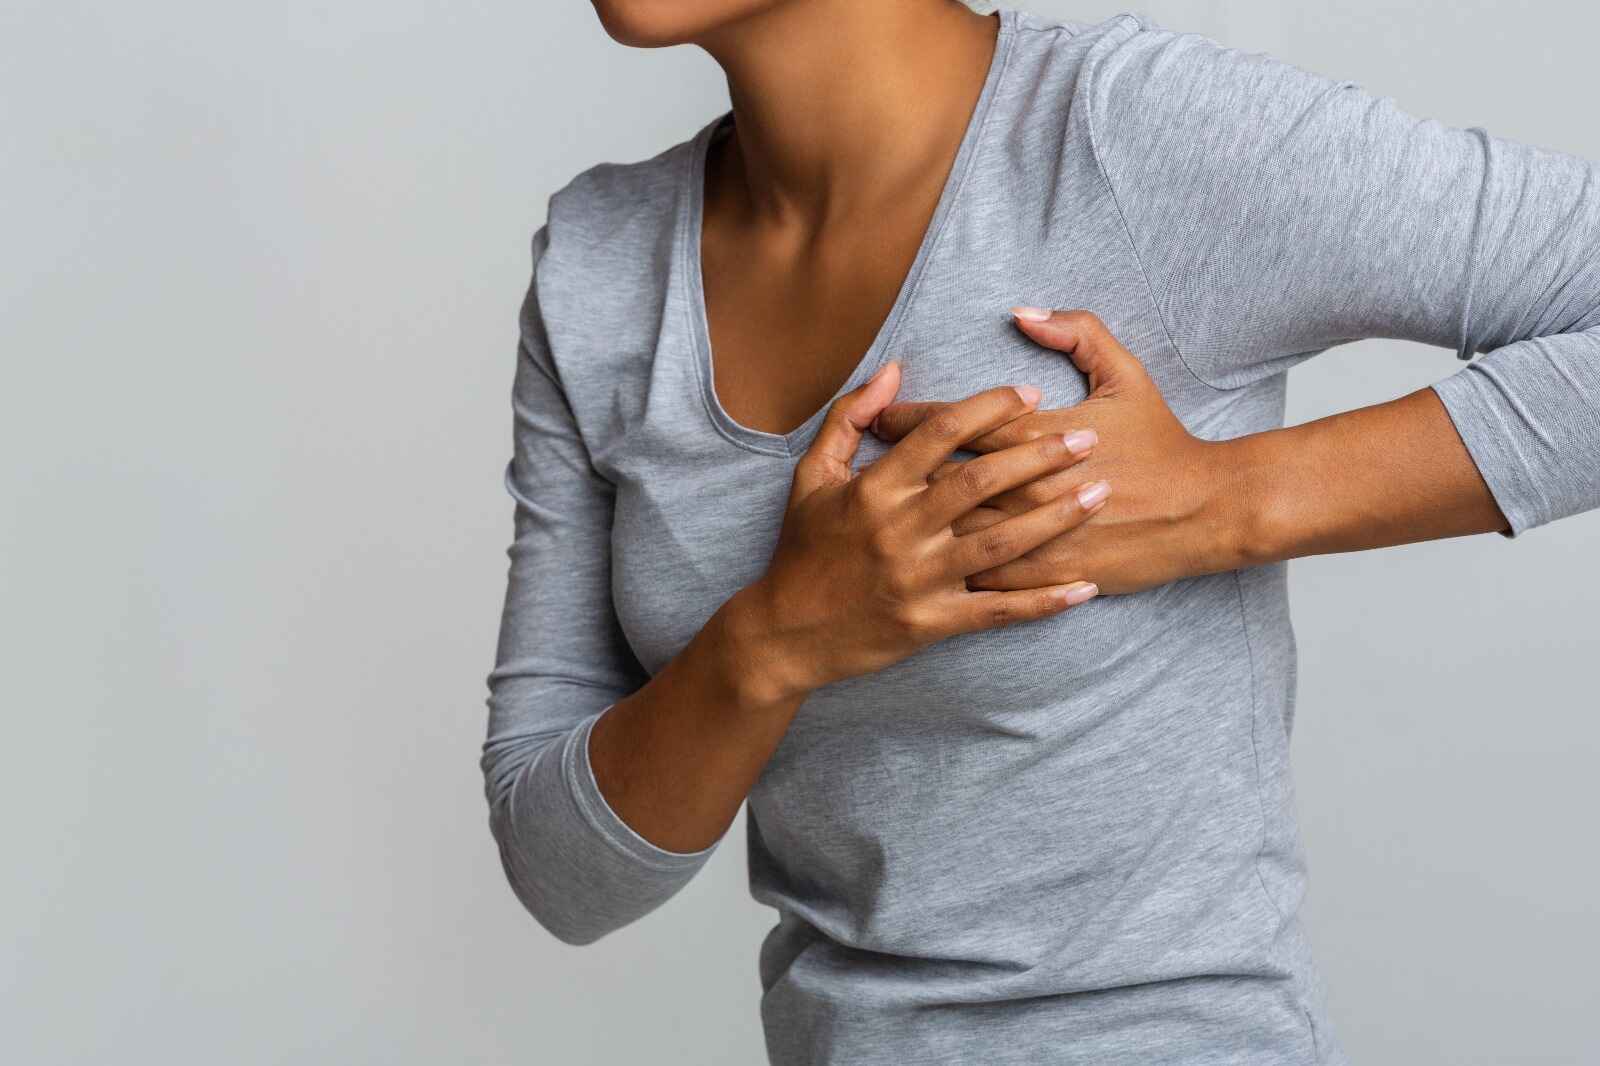 Symptoms of heart palpitations include irregular heartbeat, chest pounding, and heart fluttering.